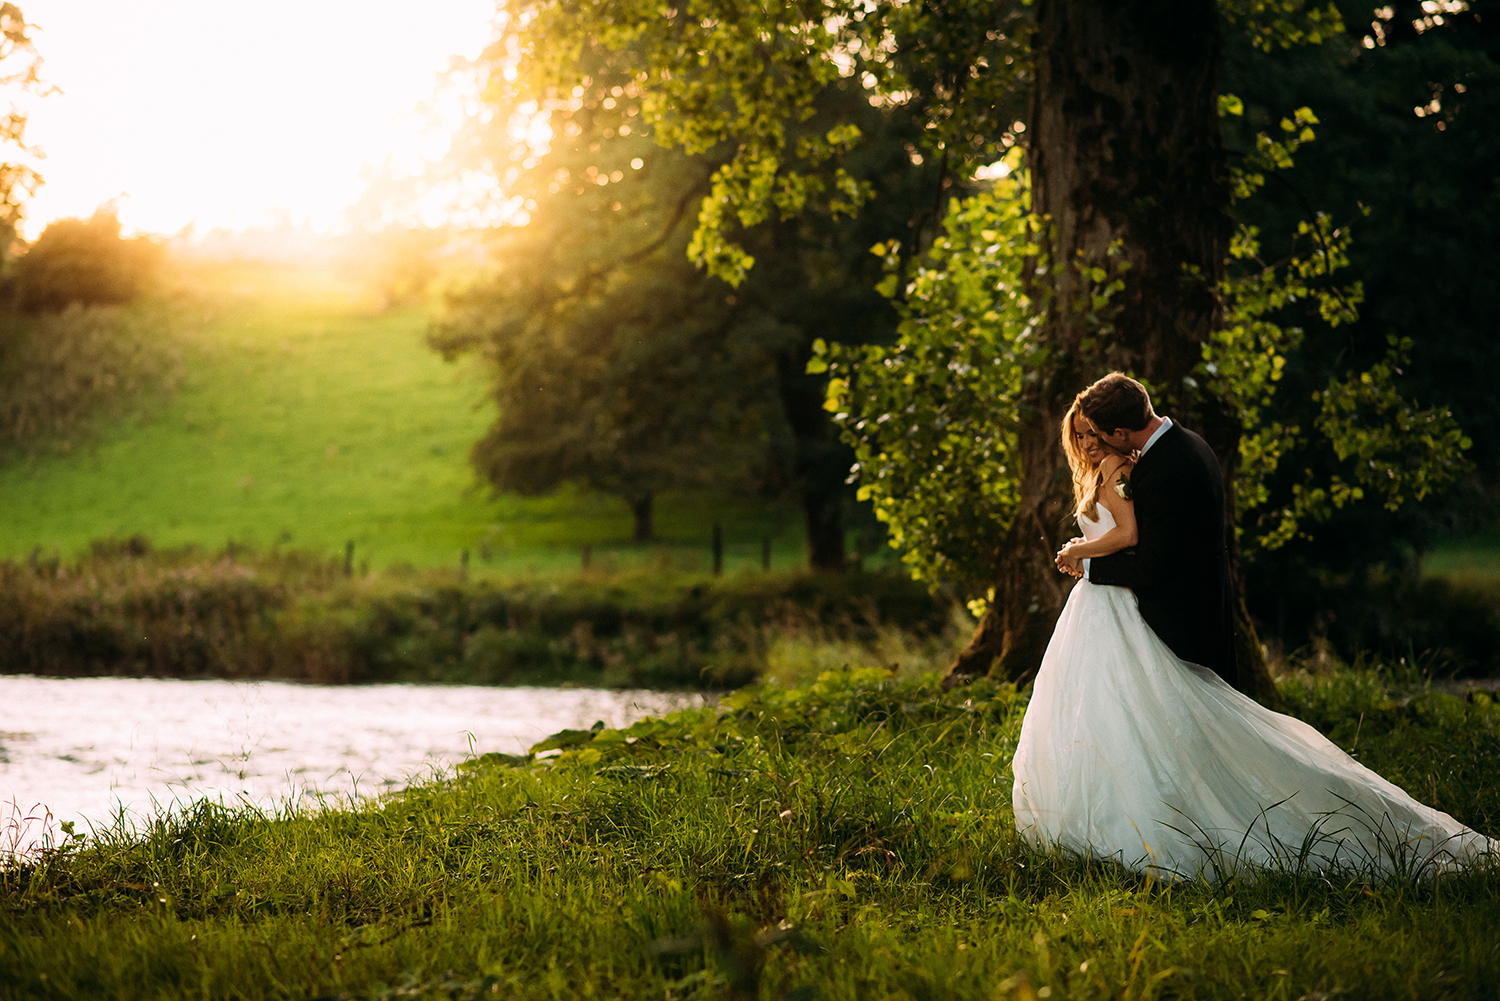  bride and groom cuddle byt the river at sunset 